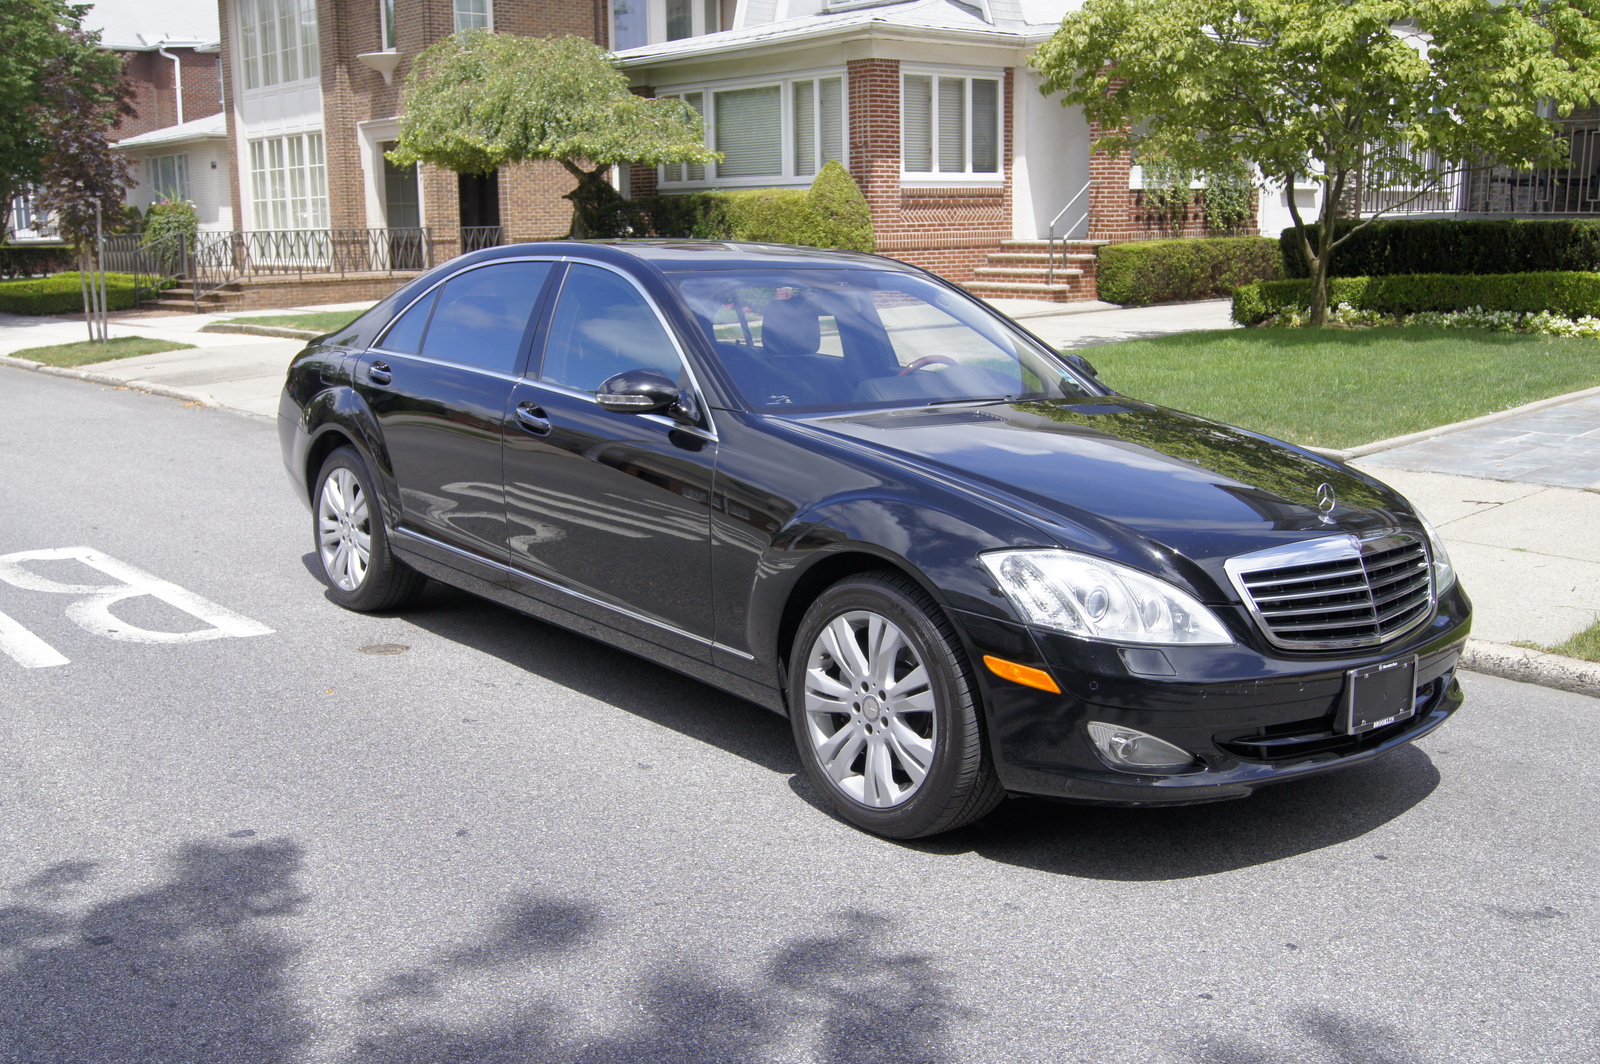 2009 Mercedes s550 4matic review #5